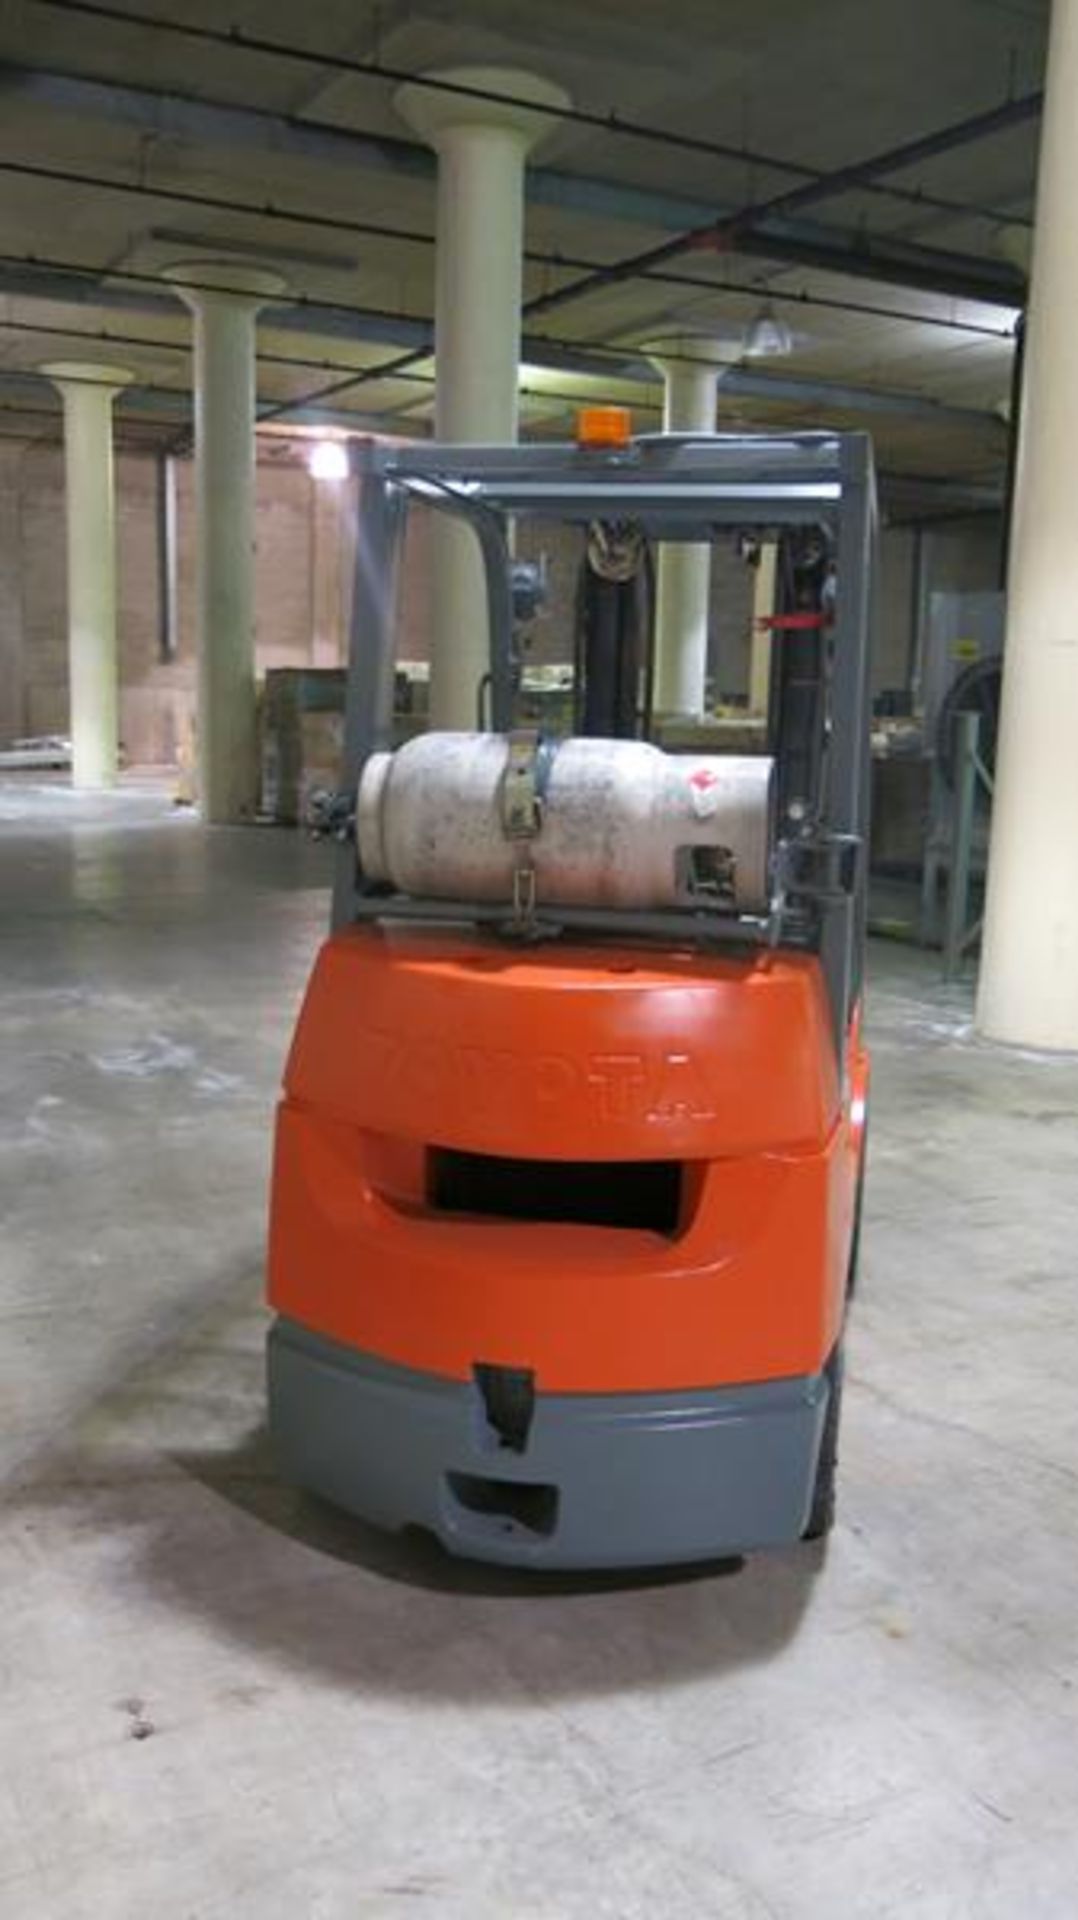 TOYOTA, 7FGCU25, 4,500 LBS, 3 STAGE, LPG FORKLIFT WITH SIDE SHIFT, 189" MAXIMUM LIFT, S/N 80139 - Image 5 of 8